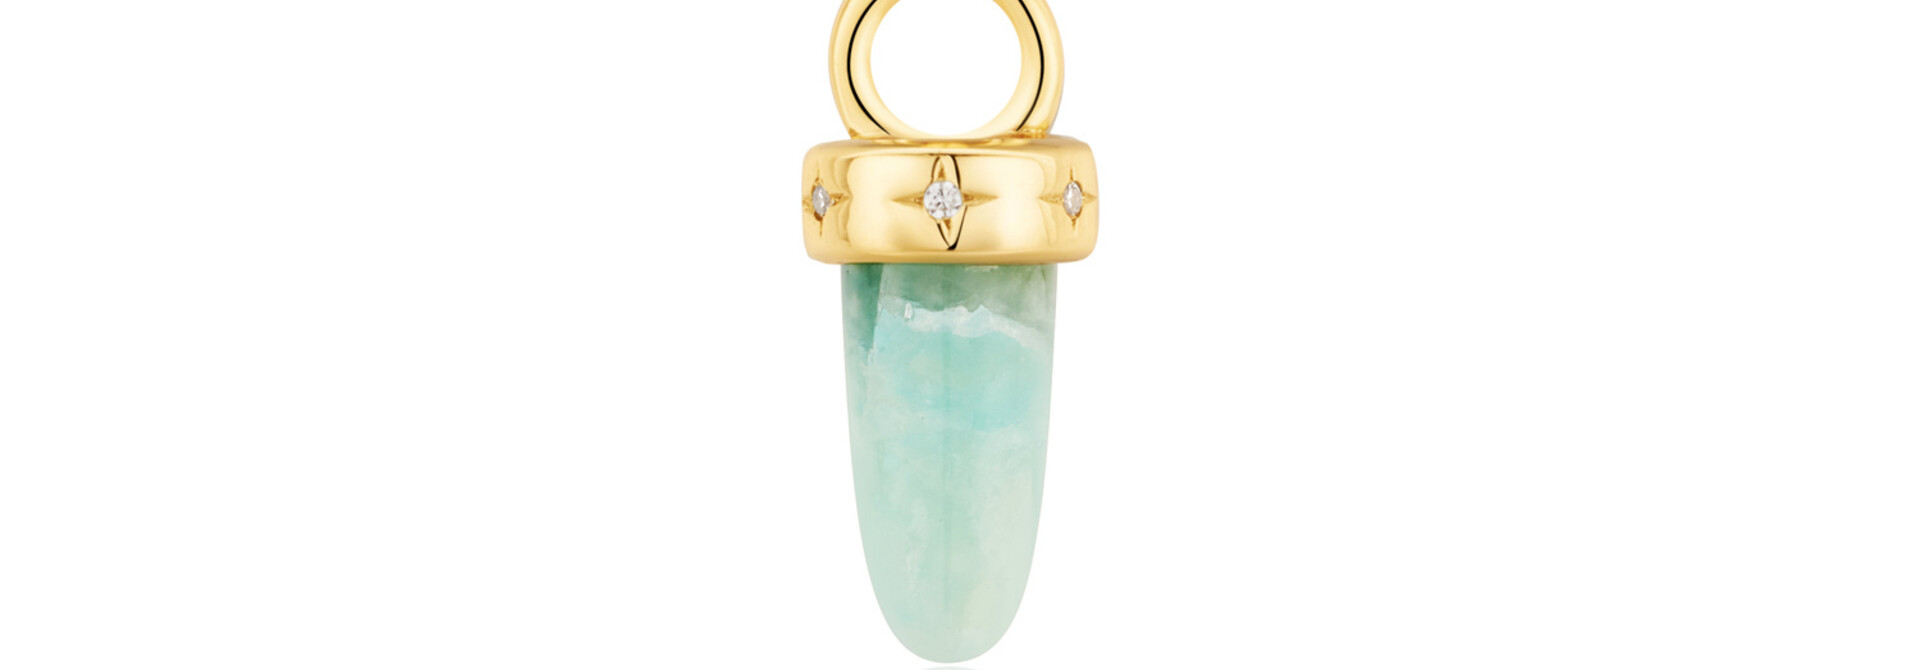 Amazonite Earring Charm - Gold Plated